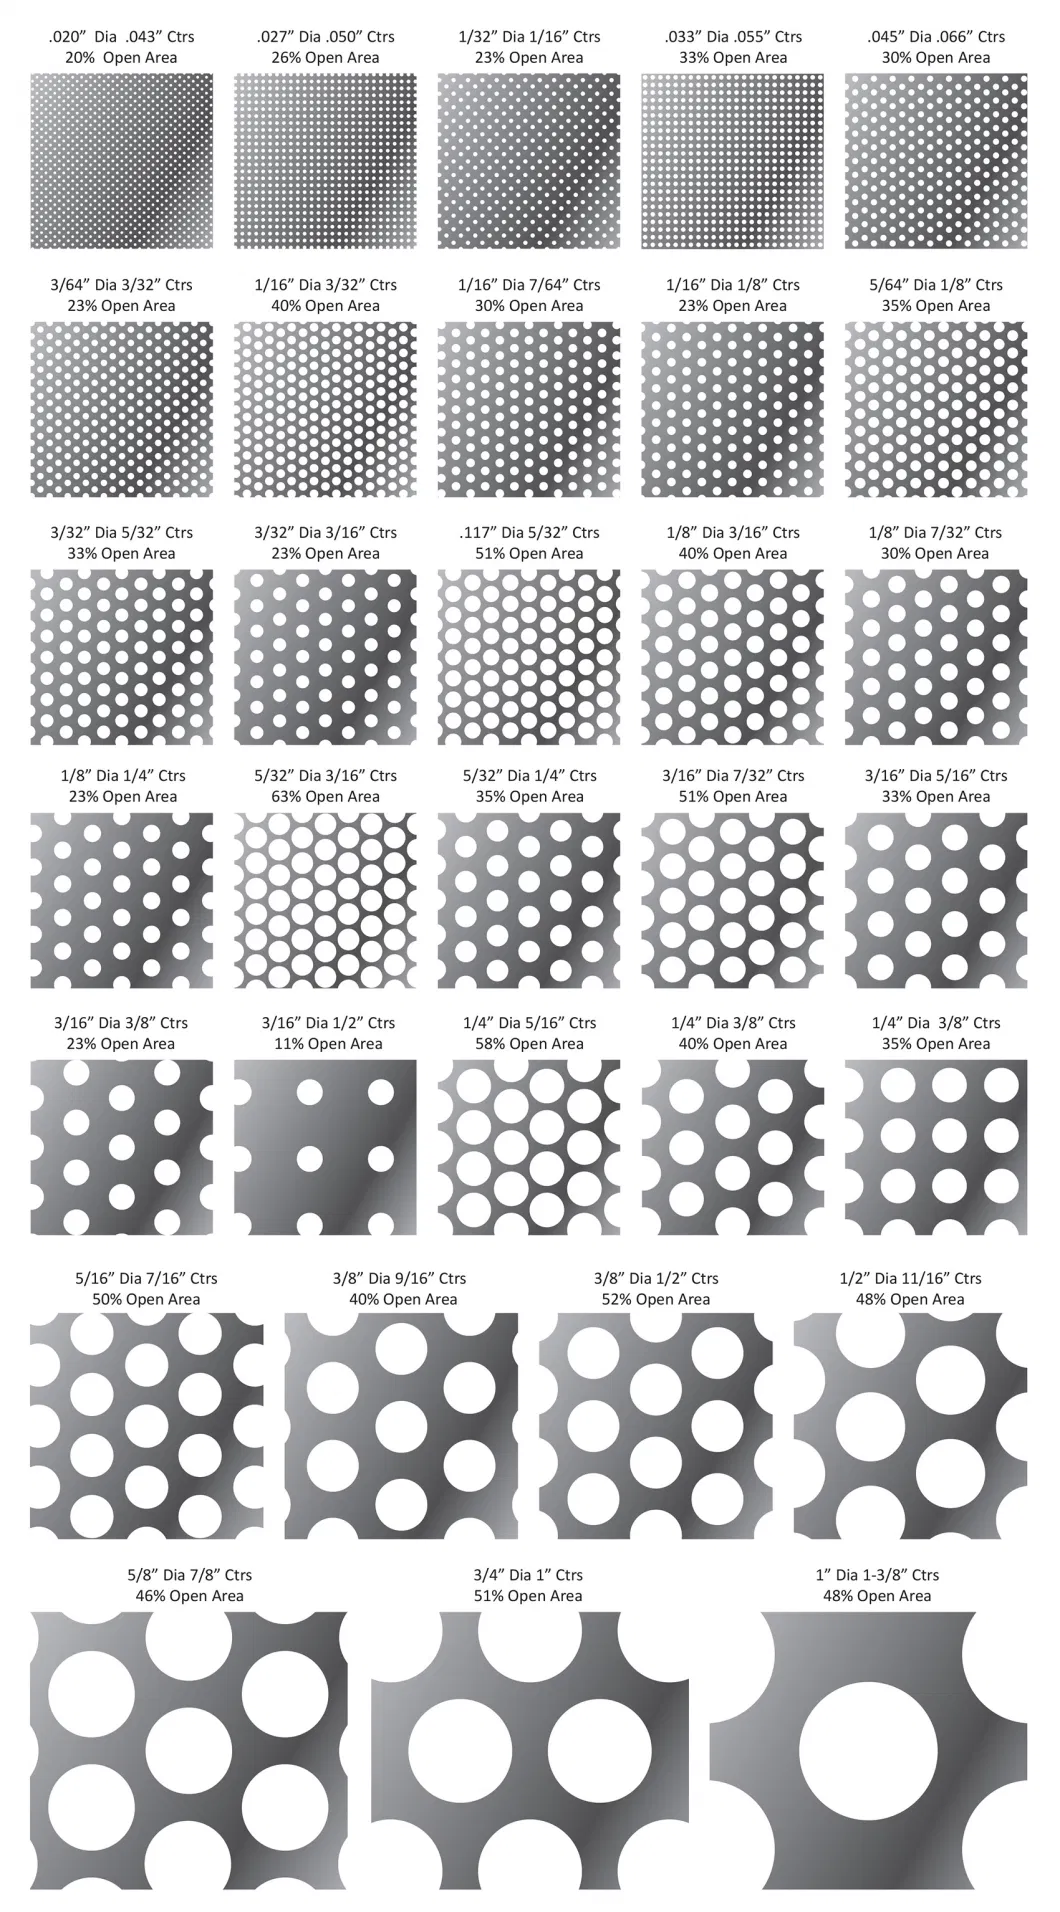 Punch Hole Plate 3mm 304 316 Stainless Steel Perforated Sheet Metal Panel